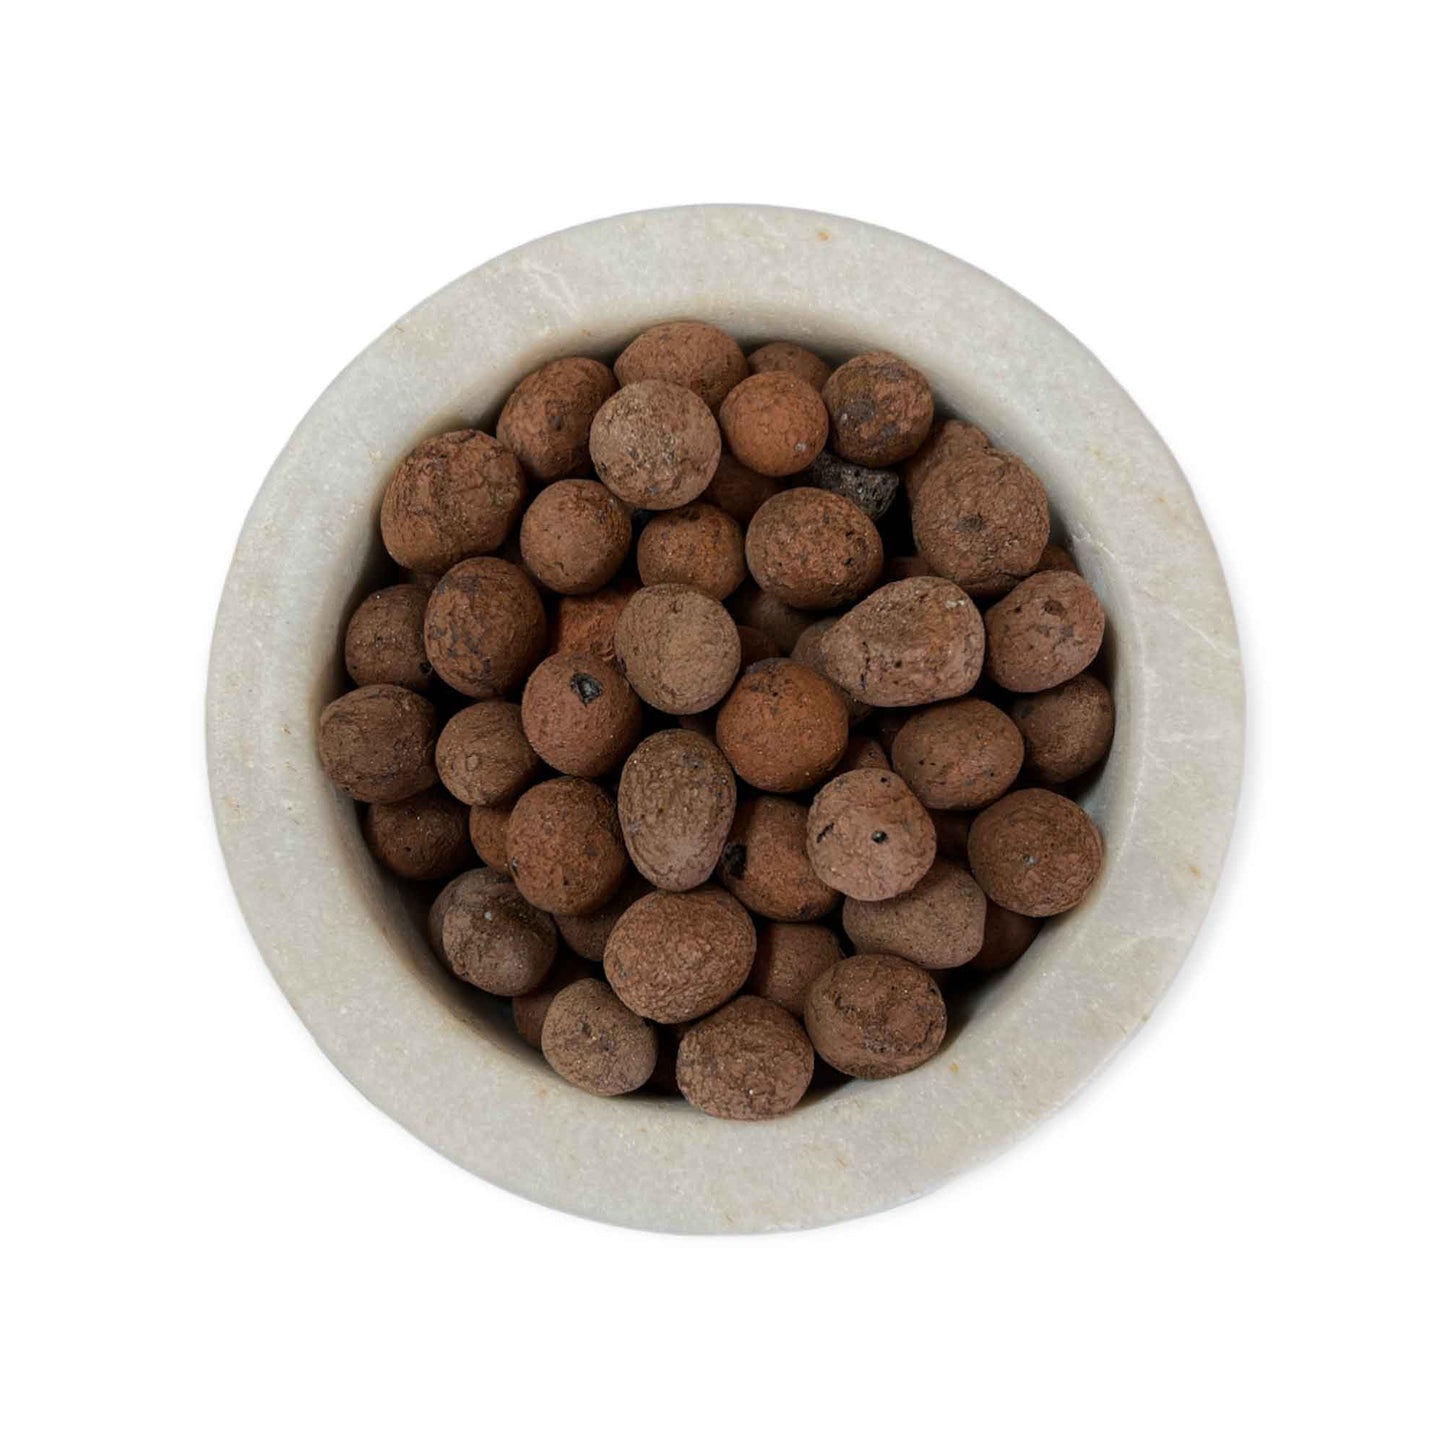 10L Expanded Hydro Clay Balls - Hydroponic Pebbles Plant Growing Medium Pellets